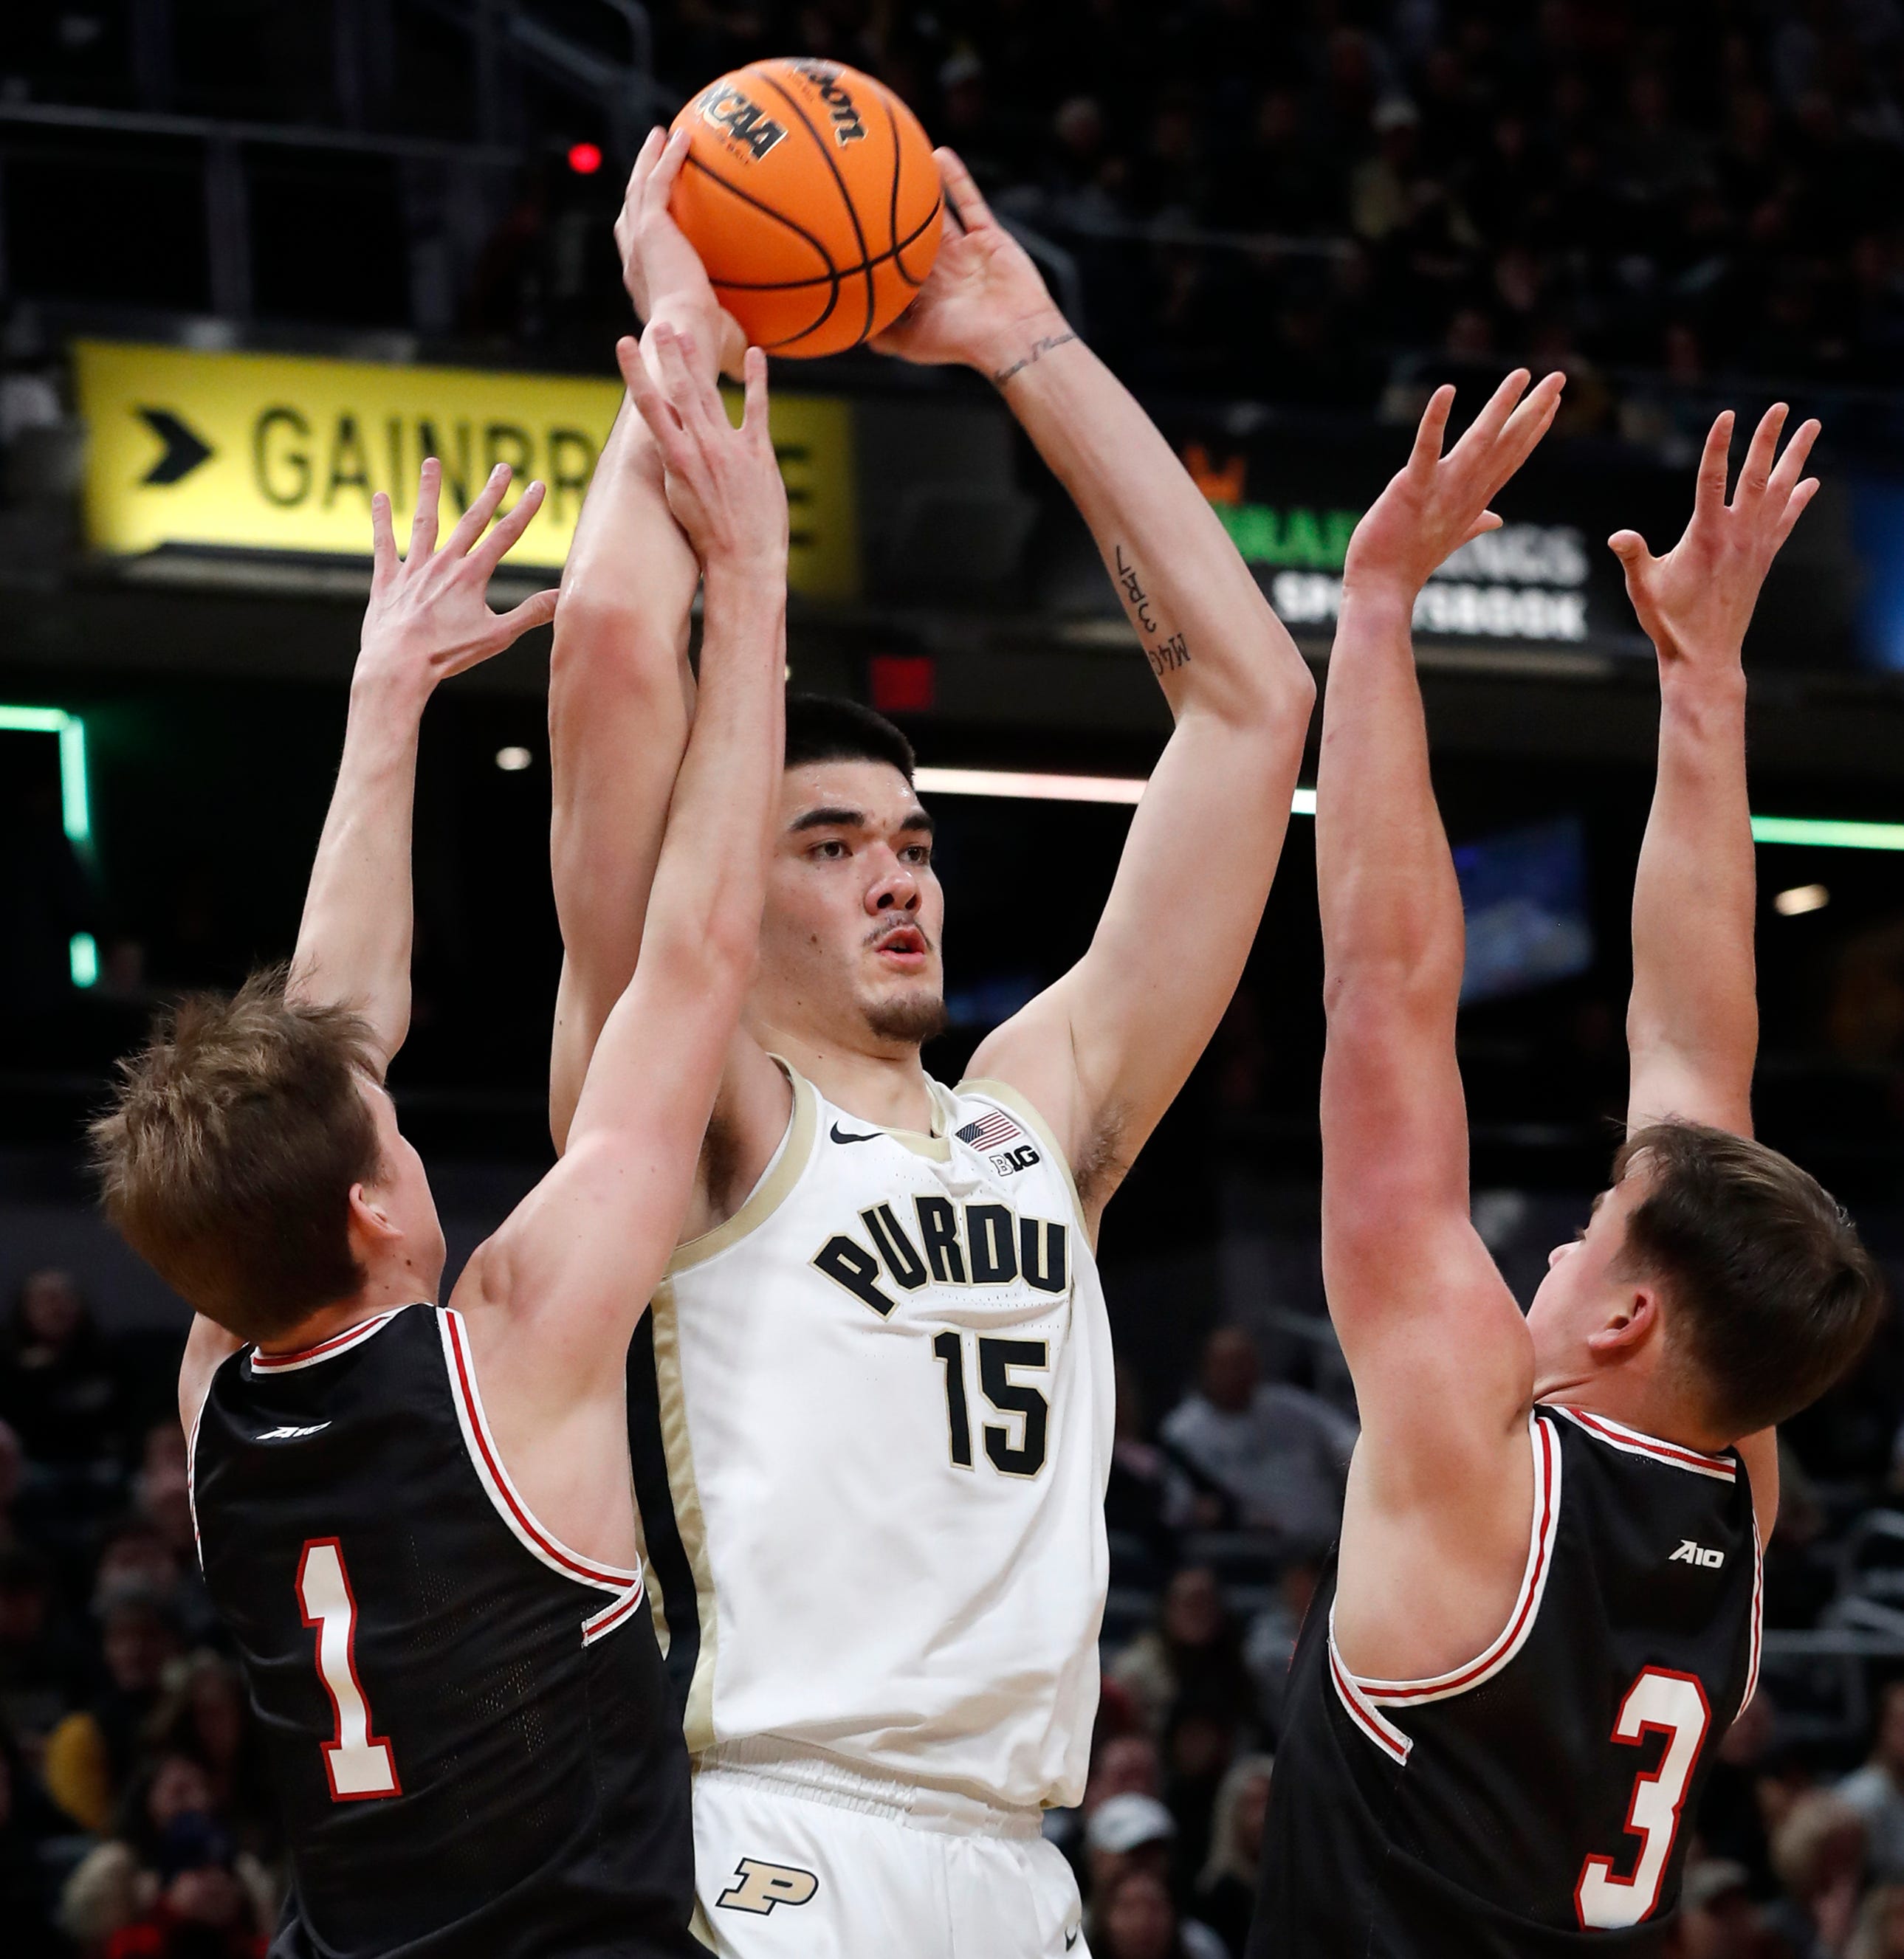 ‘It’s starting to get out of control.’ Matt Painter lobbies for fouls on Purdue basketball star Zach Edey